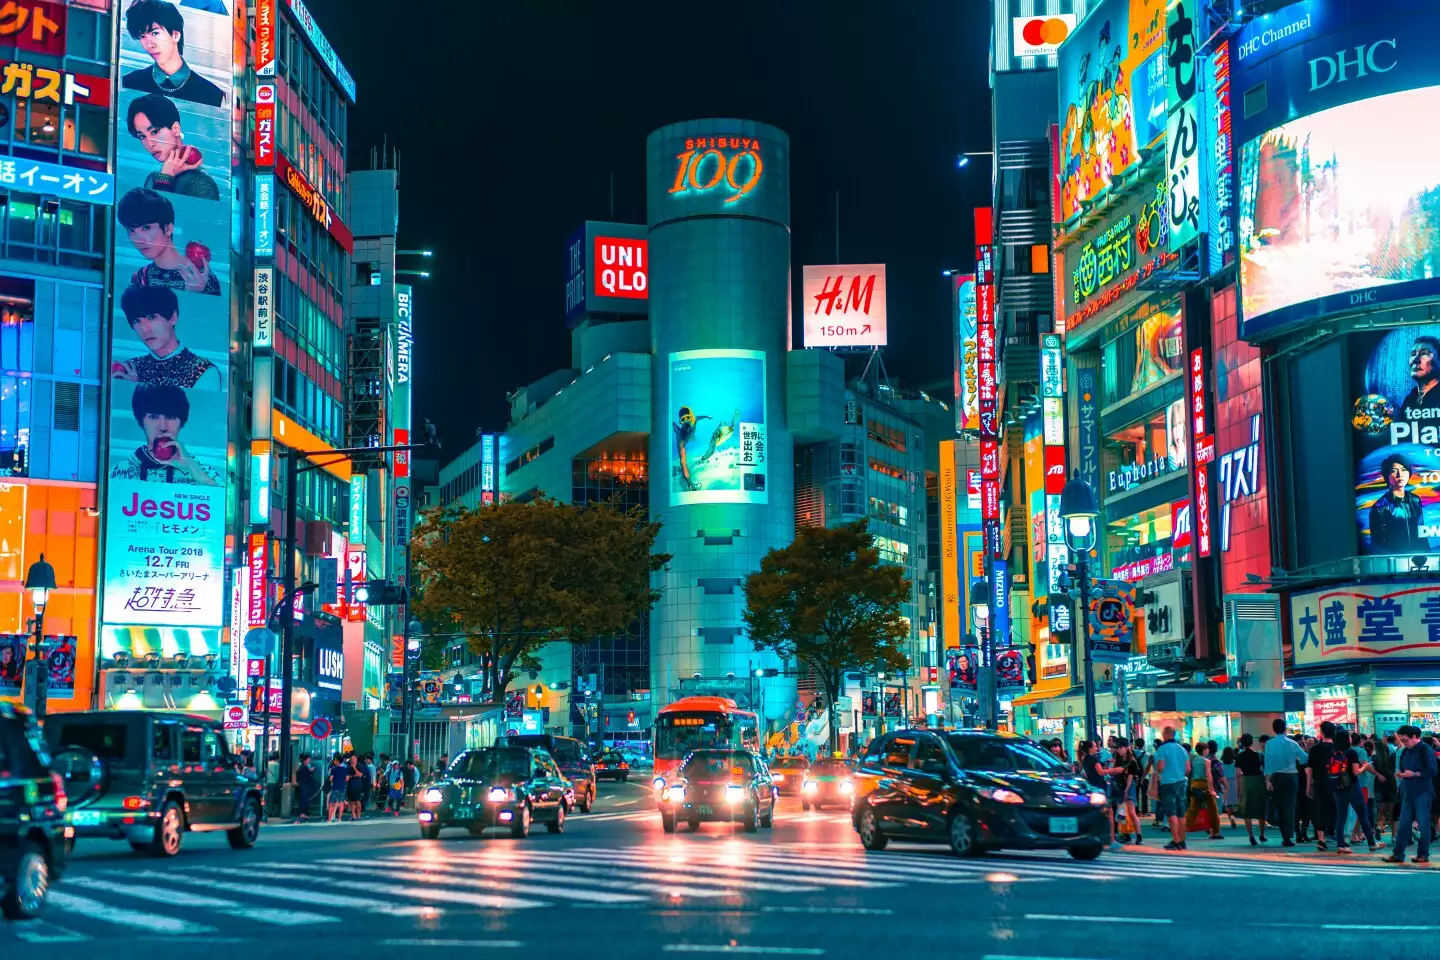 How did Japan's advance into the ASEAN market with digital technology make the country strong again?